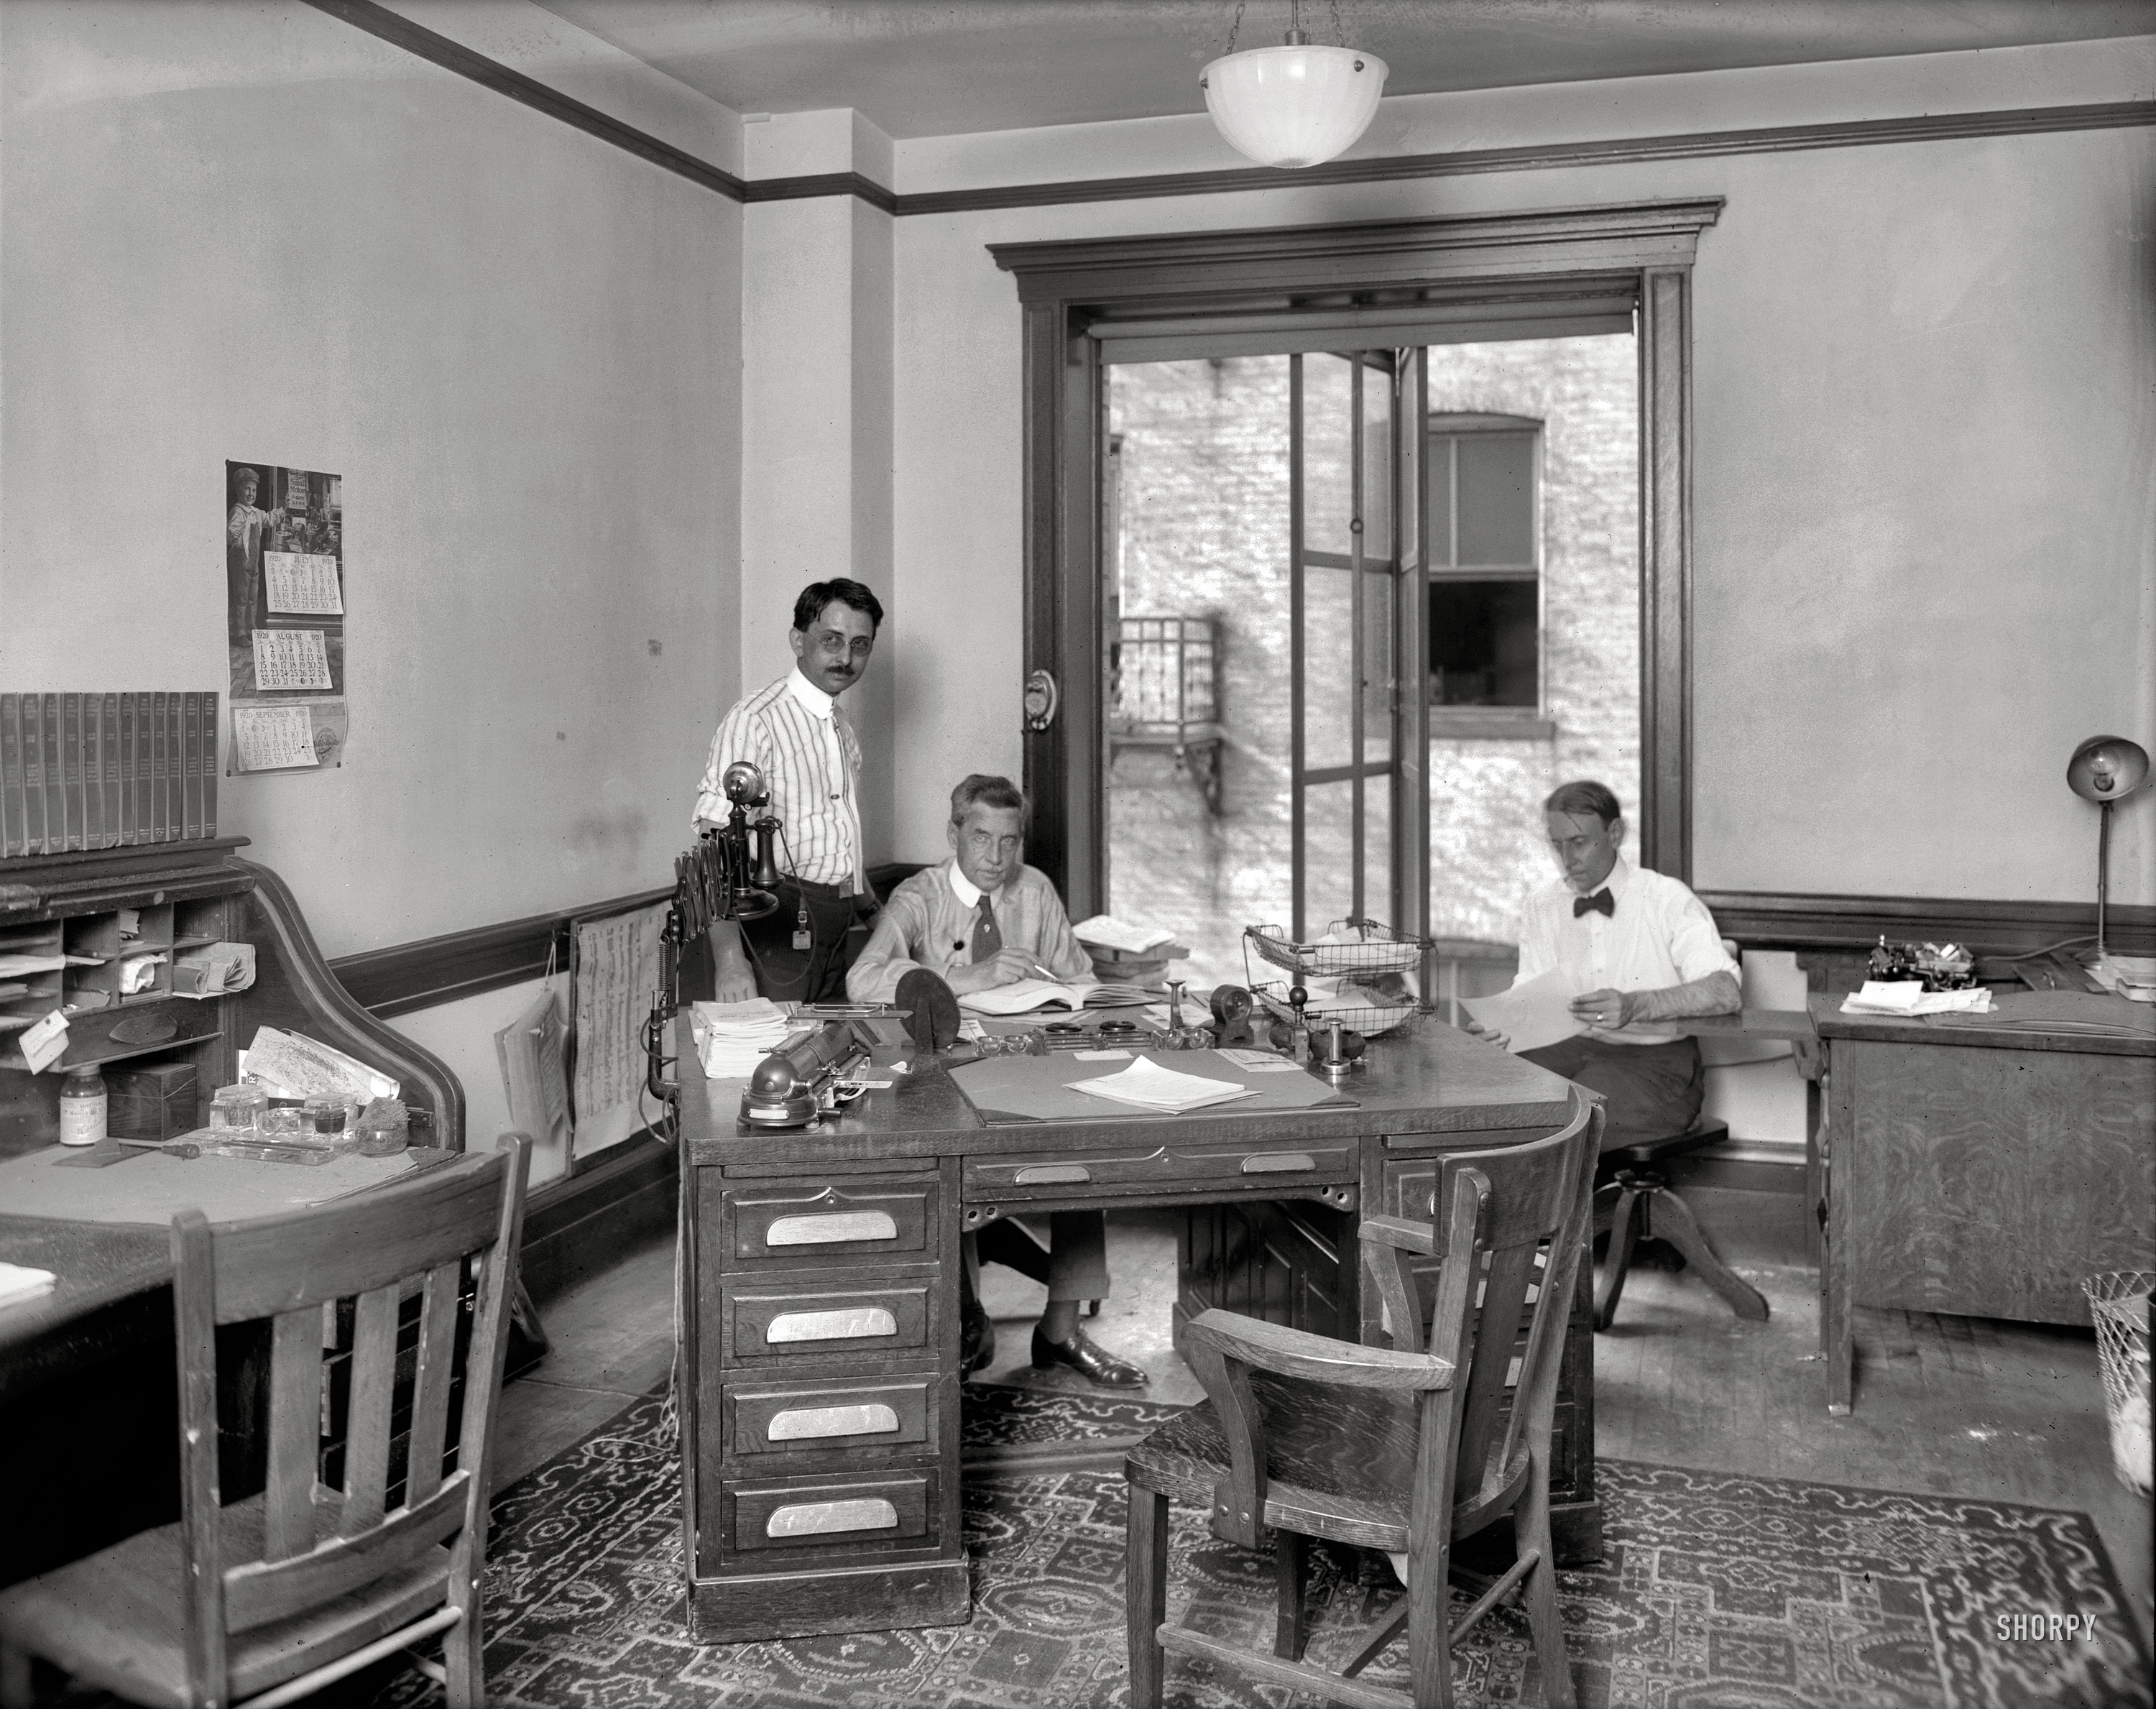 Washington, D.C., 1920. "Faulkner Inc. -- office interior." And a well-equipped office it is. National Photo Company Collection glass negative. View full size.